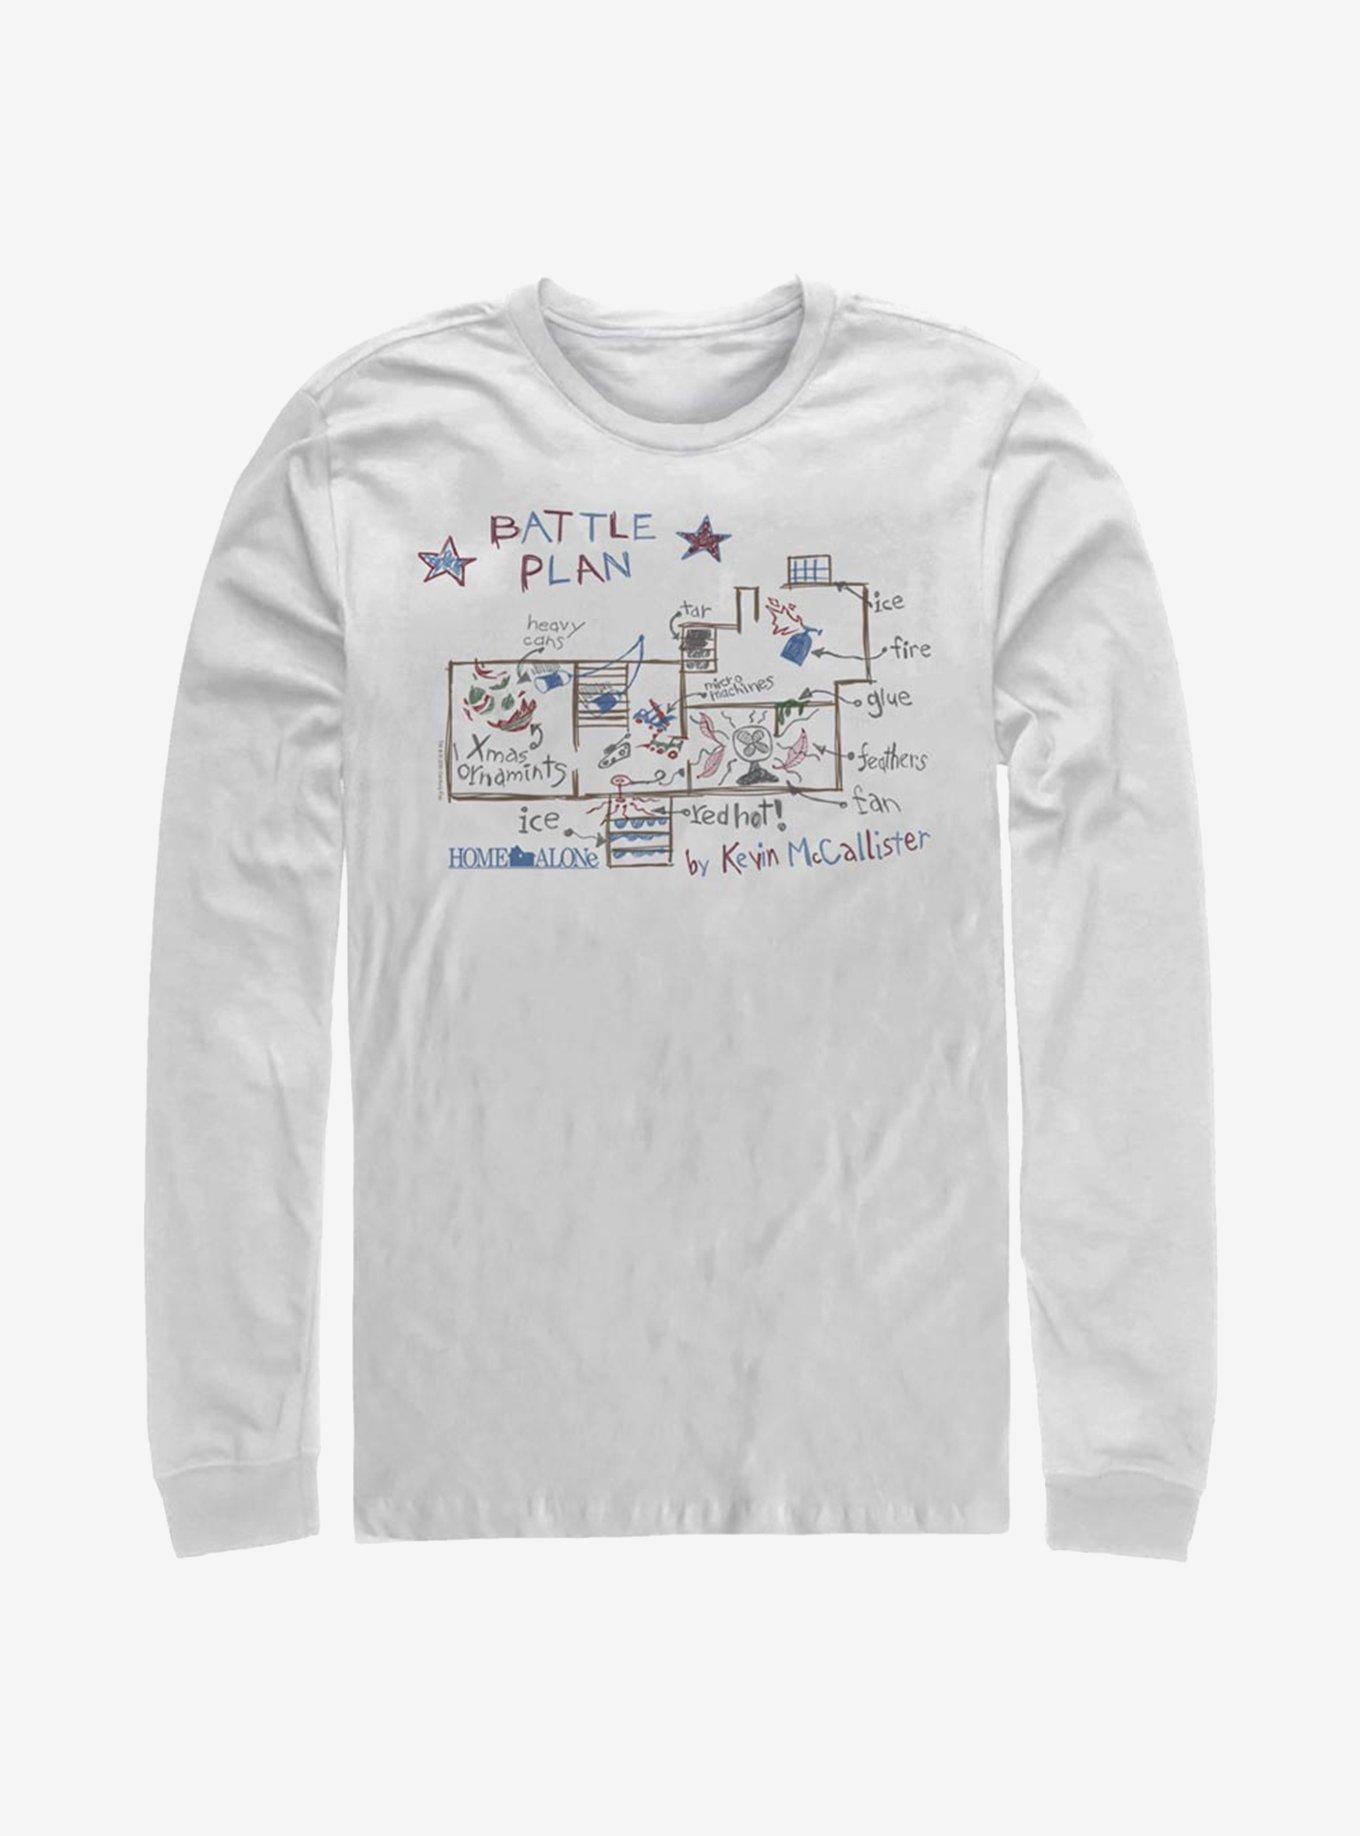 Home Alone Kevin's Plan Long-Sleeve T-Shirt, WHITE, hi-res